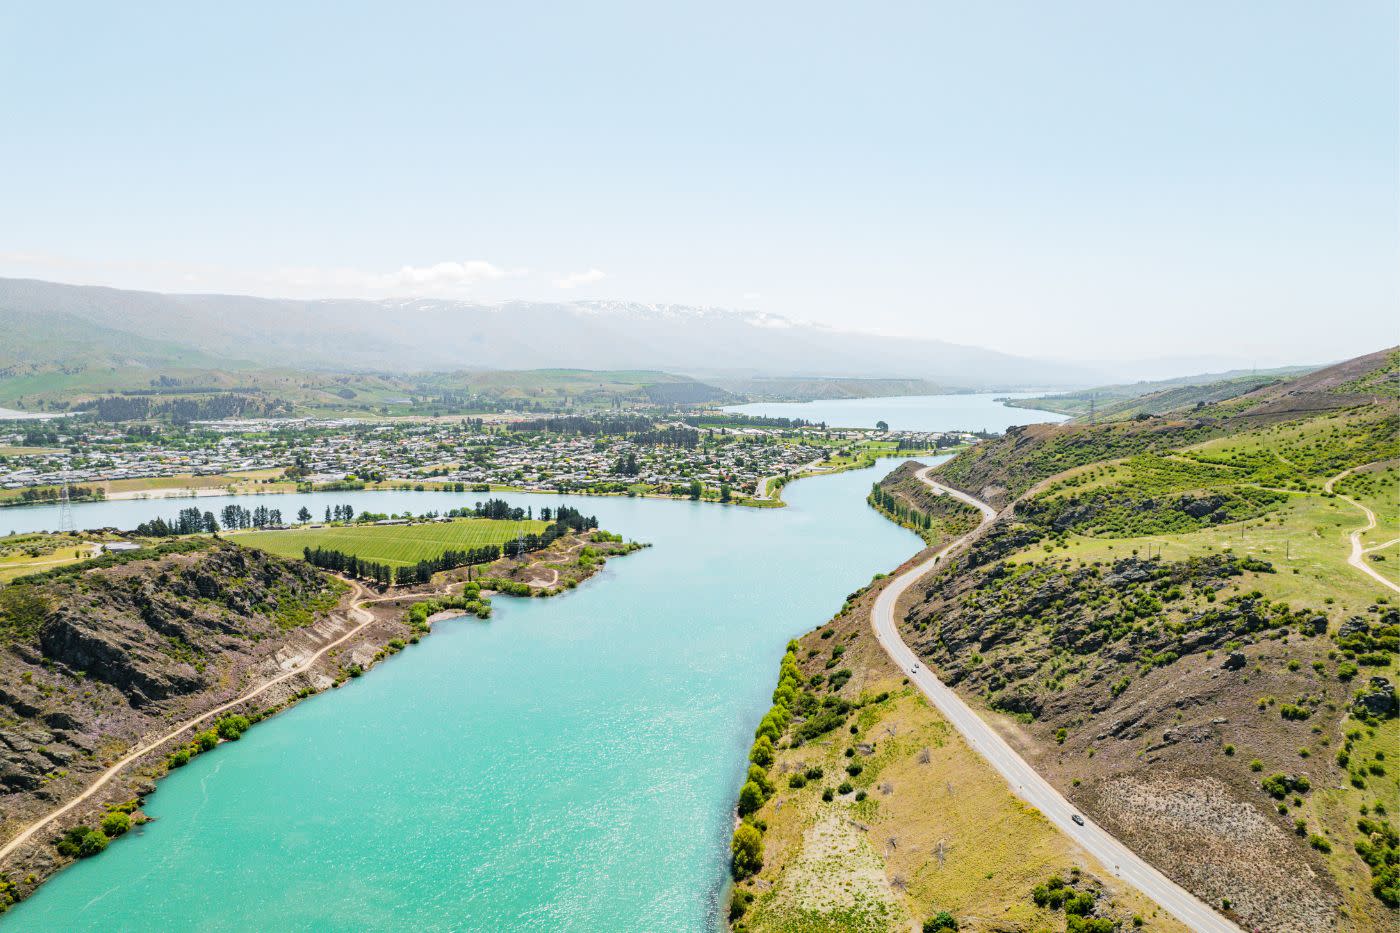 Landscape view over Cromwell and Lake Dunstan in Central Otago